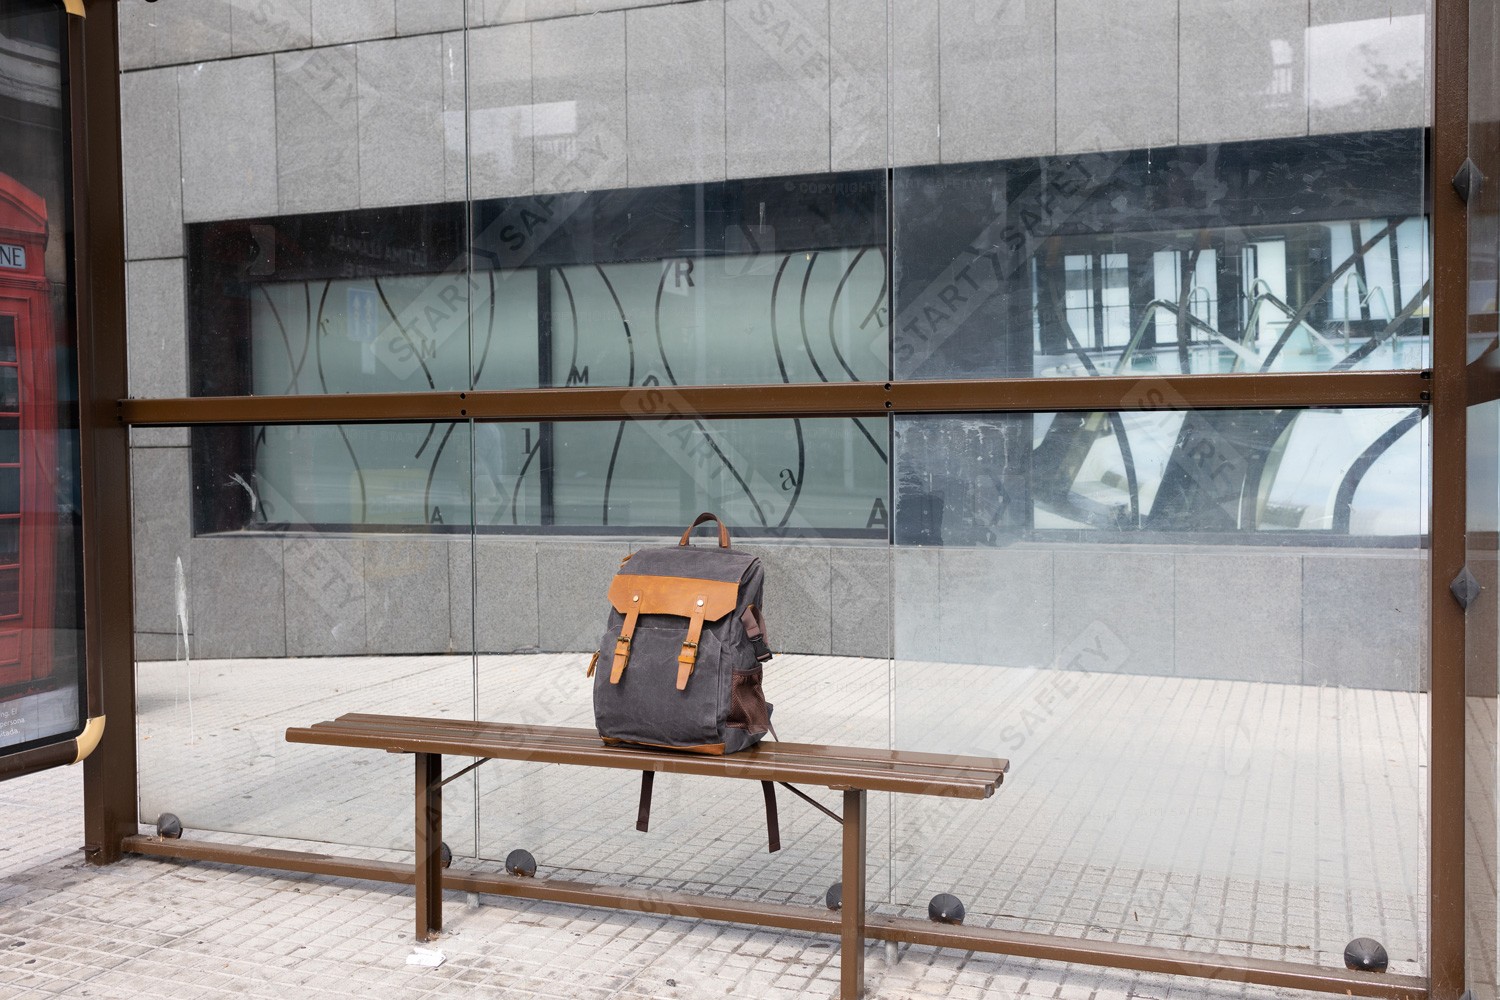 Backless Bench Installed In Bus Shelter Street Furniture